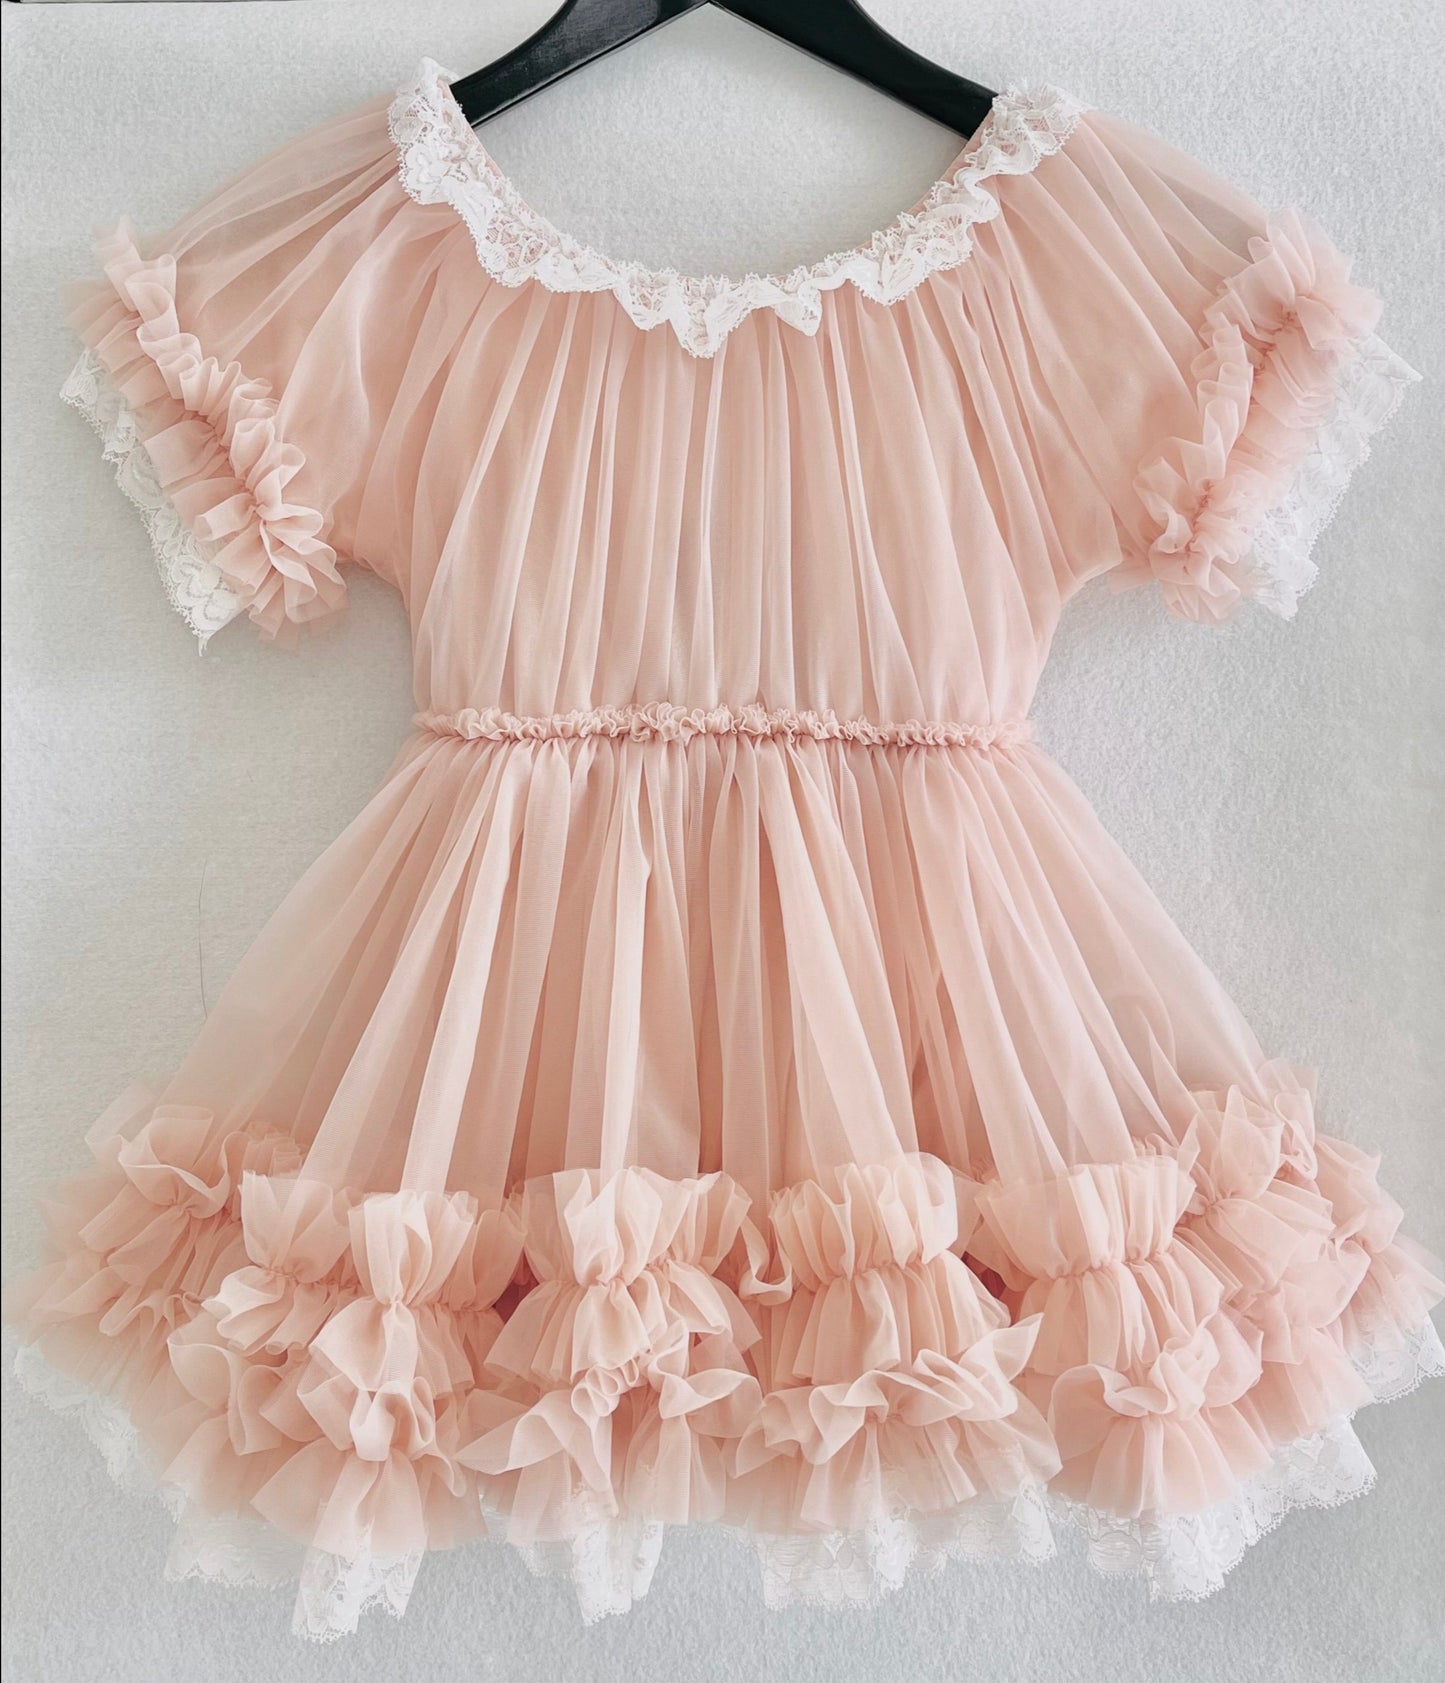 DOLLY by Le Petit Tom ® PORCELAIN DOLLY DRESS ballet pink